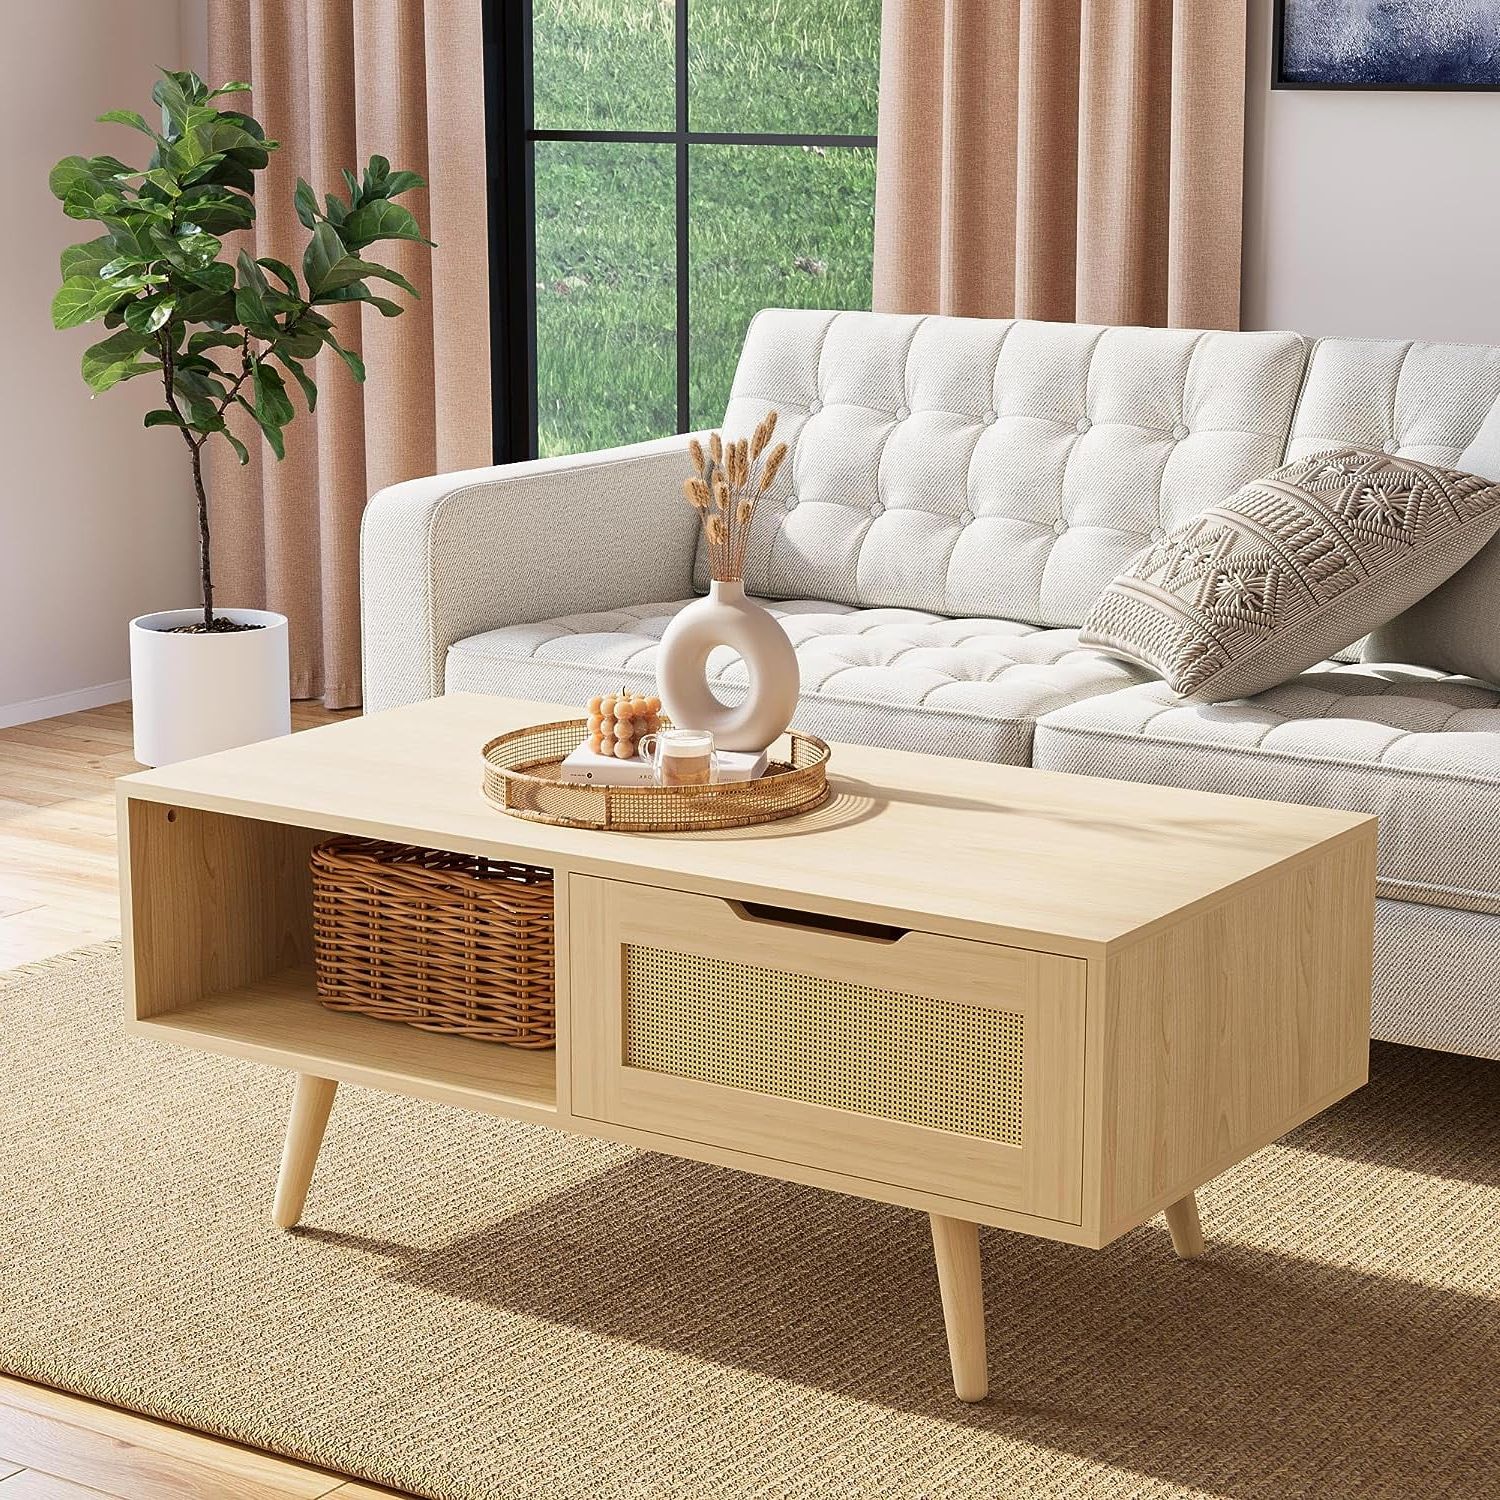 Coffee Tables With Solid Legs With Latest Cozy Castle Boho Coffee Table With Storage, 39'' Rattan Living Room Tables  With Solid Legs, Mid Century Modern Coffee Table For Living Room, Oak –  Walmart (View 2 of 10)